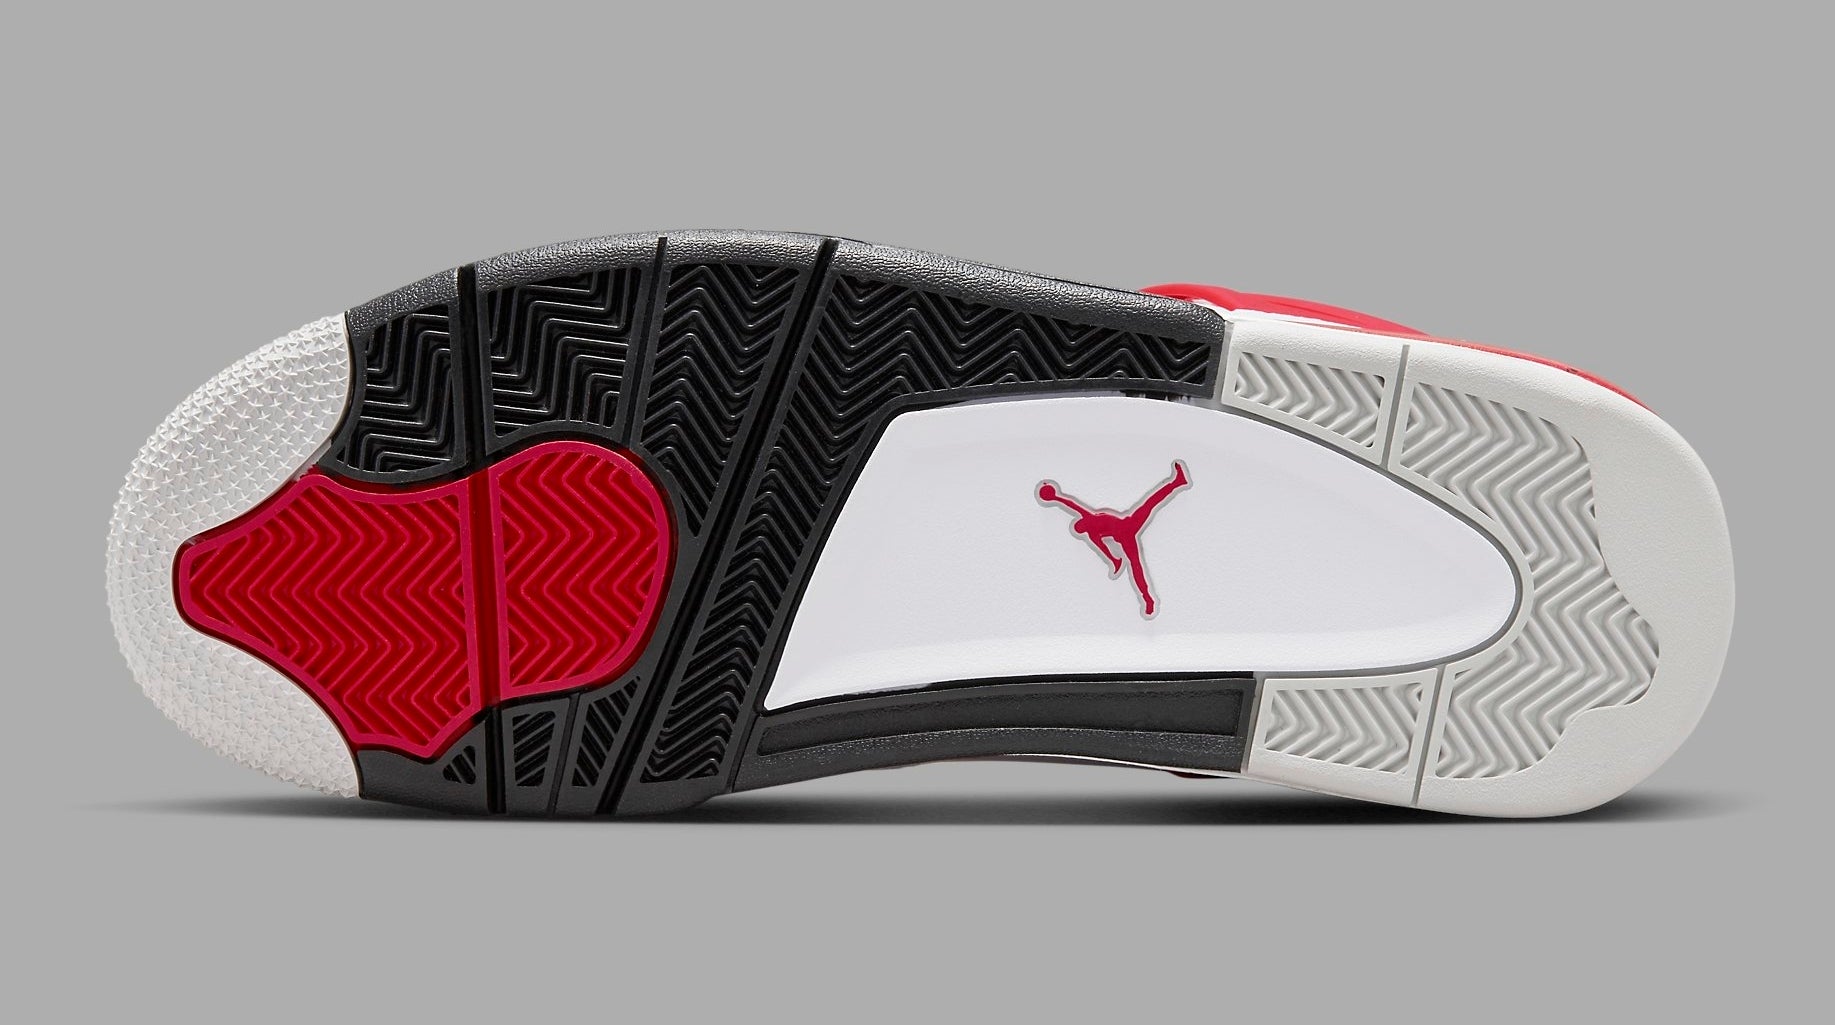 Air Jordan 4 IV Red Cement Release Date DH6927-161 Sole